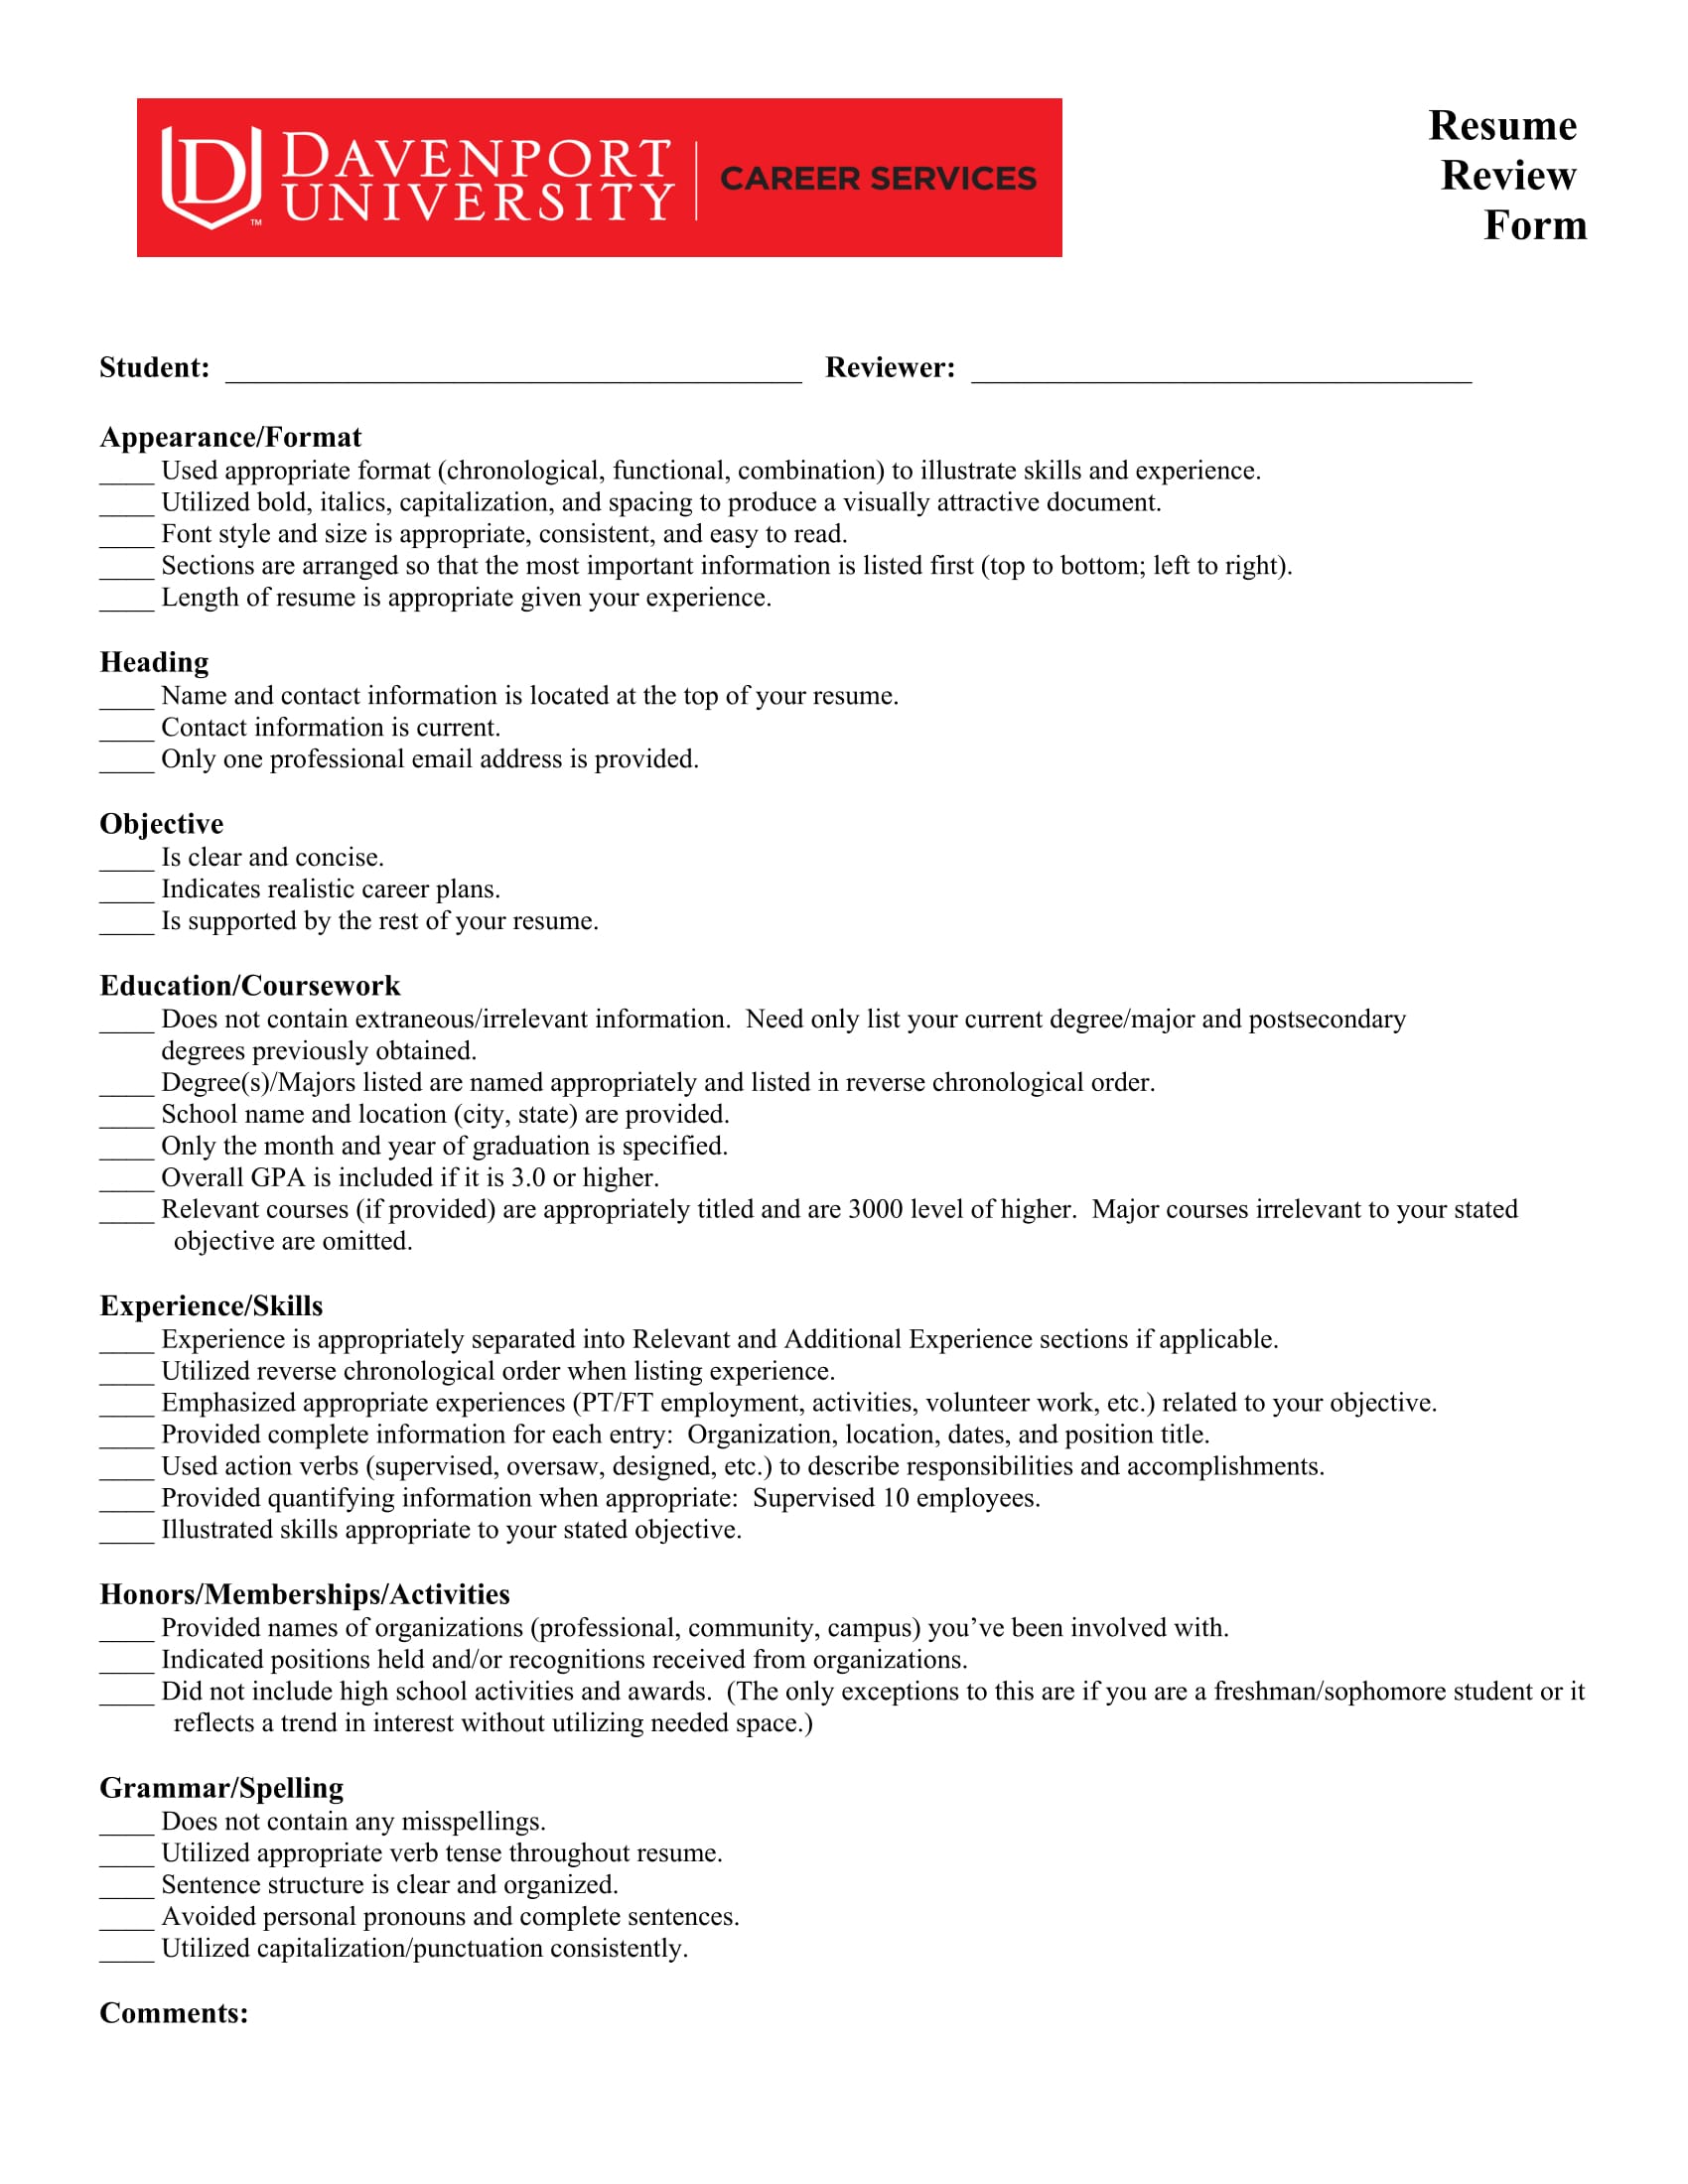 student resume review evaluation form 1